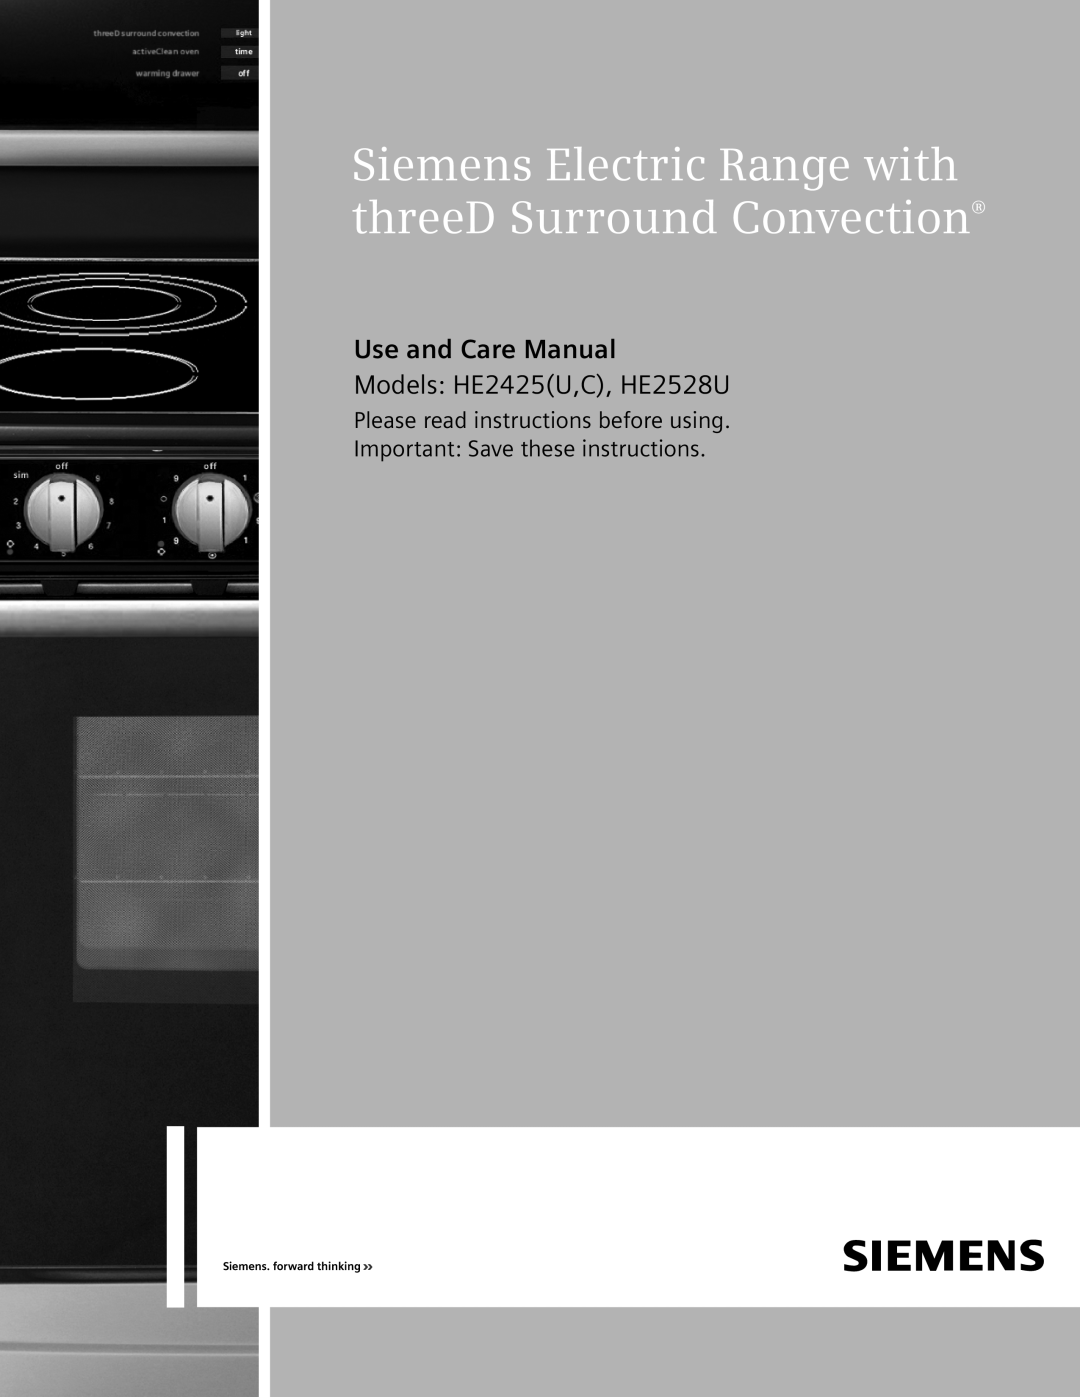 Siemens HE2425 manual Siemens Electric Range with threeD Surround Convection, Use and Care Manual 